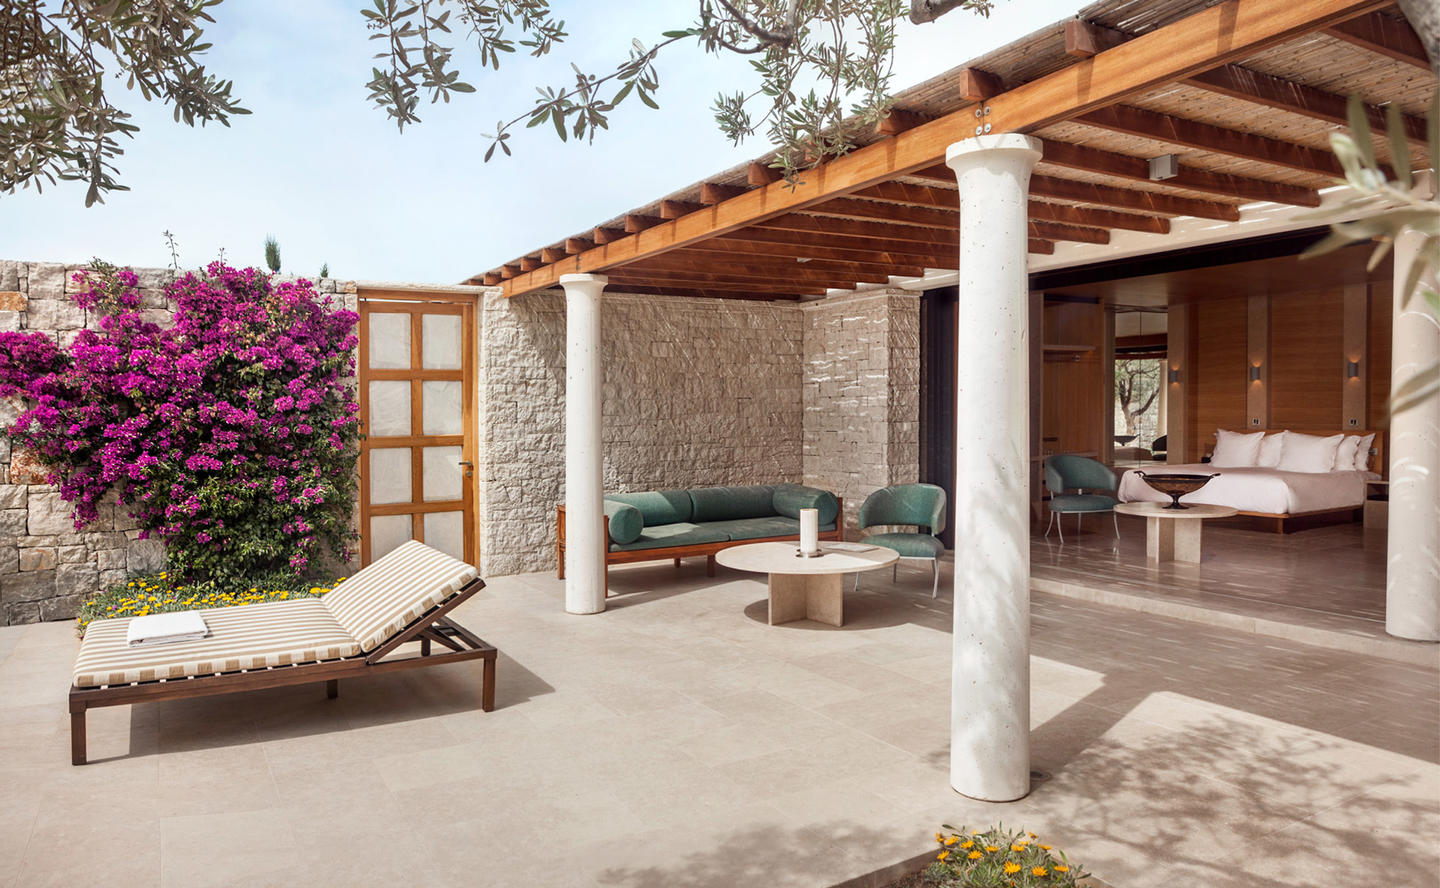 Terrace with sun lounger and outdoor living area, One-Bedroom Beach Cabana - Amanzoe, Greece